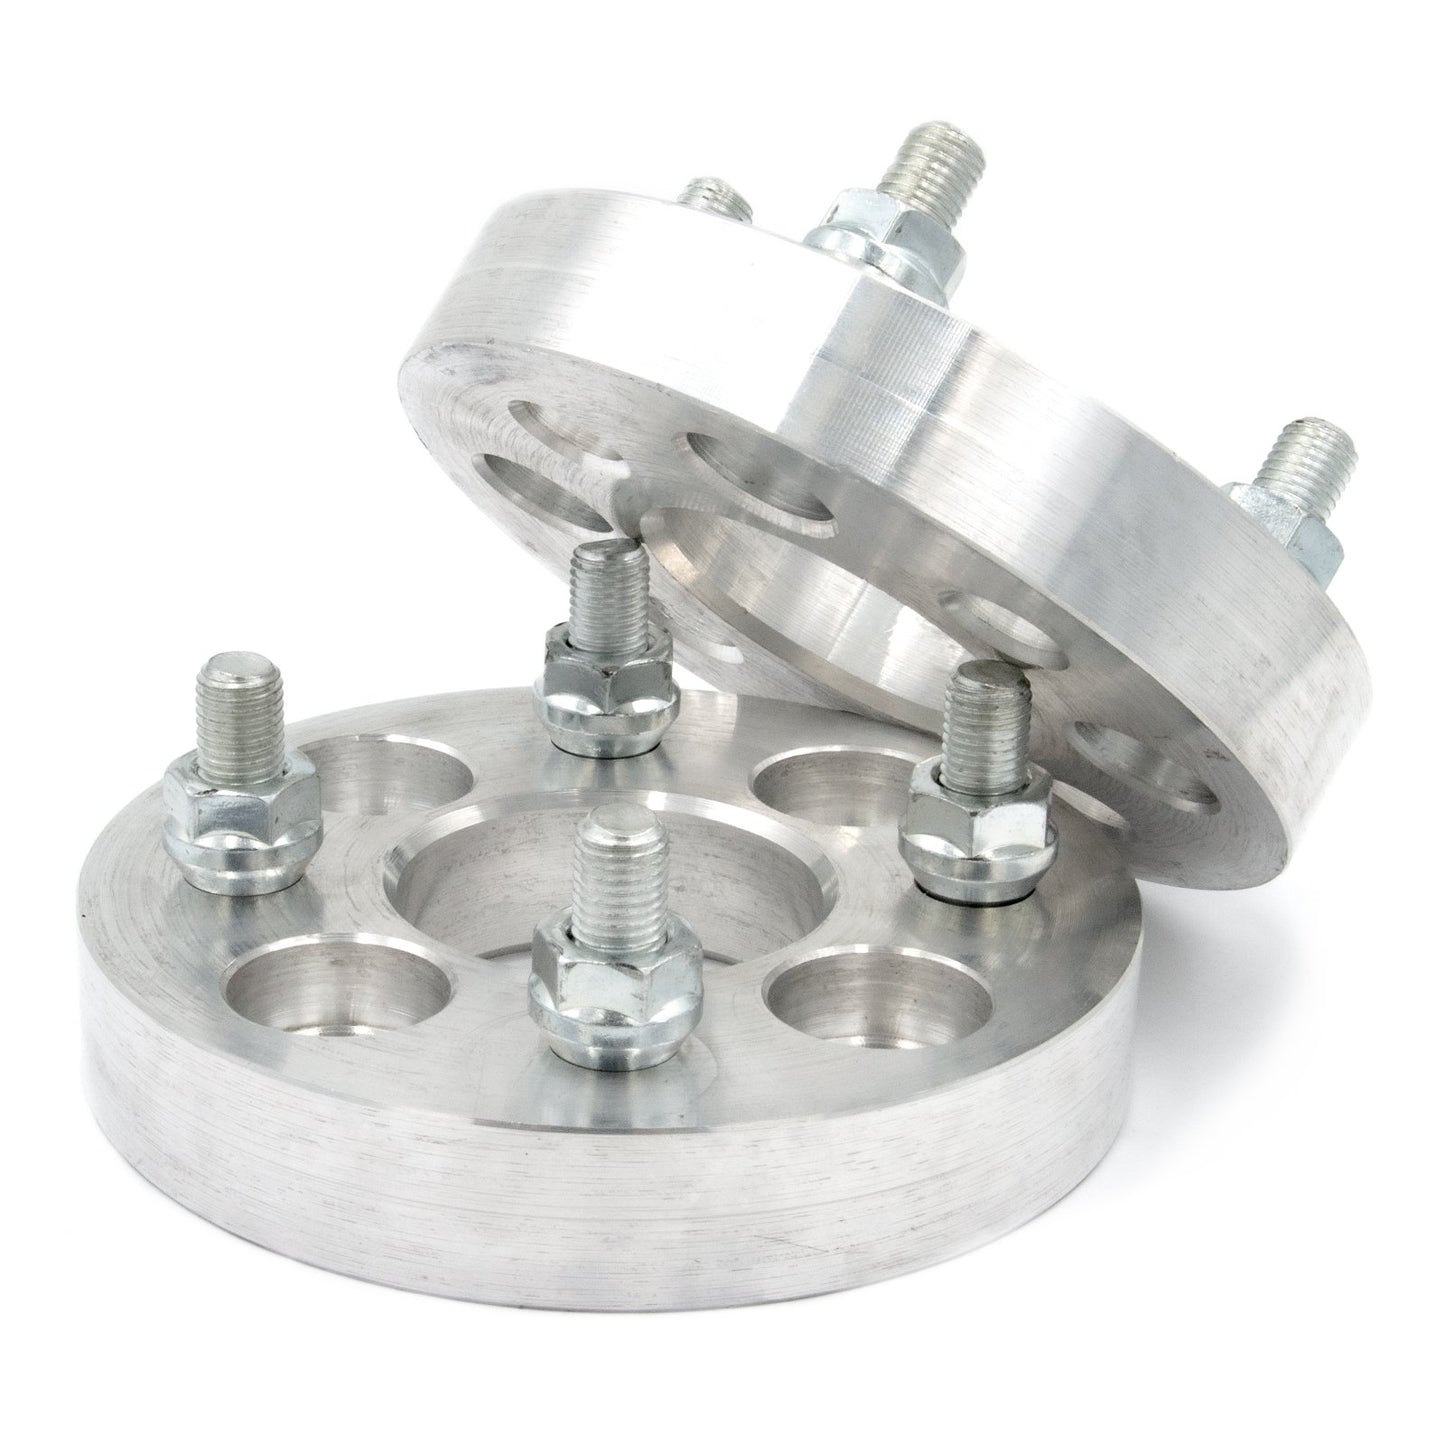 4x4" to 4x136 Wheel Spacer/Adapter - Thickness: 3/4"- 4"